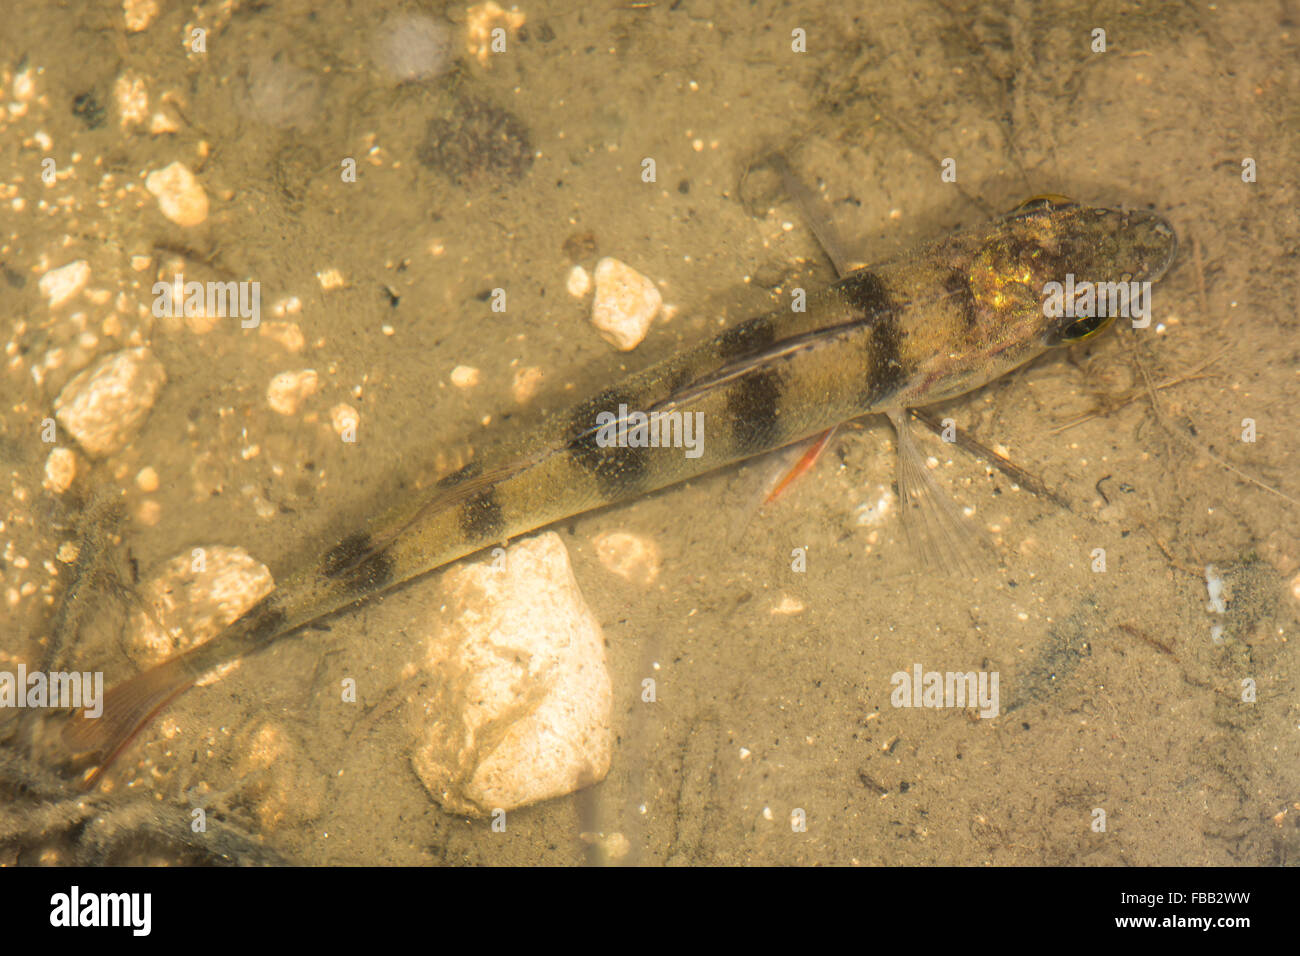 Perch (Perca fluviatilis) in underwater environment from above. A common freshwater fish seen from above, showing bars Stock Photo